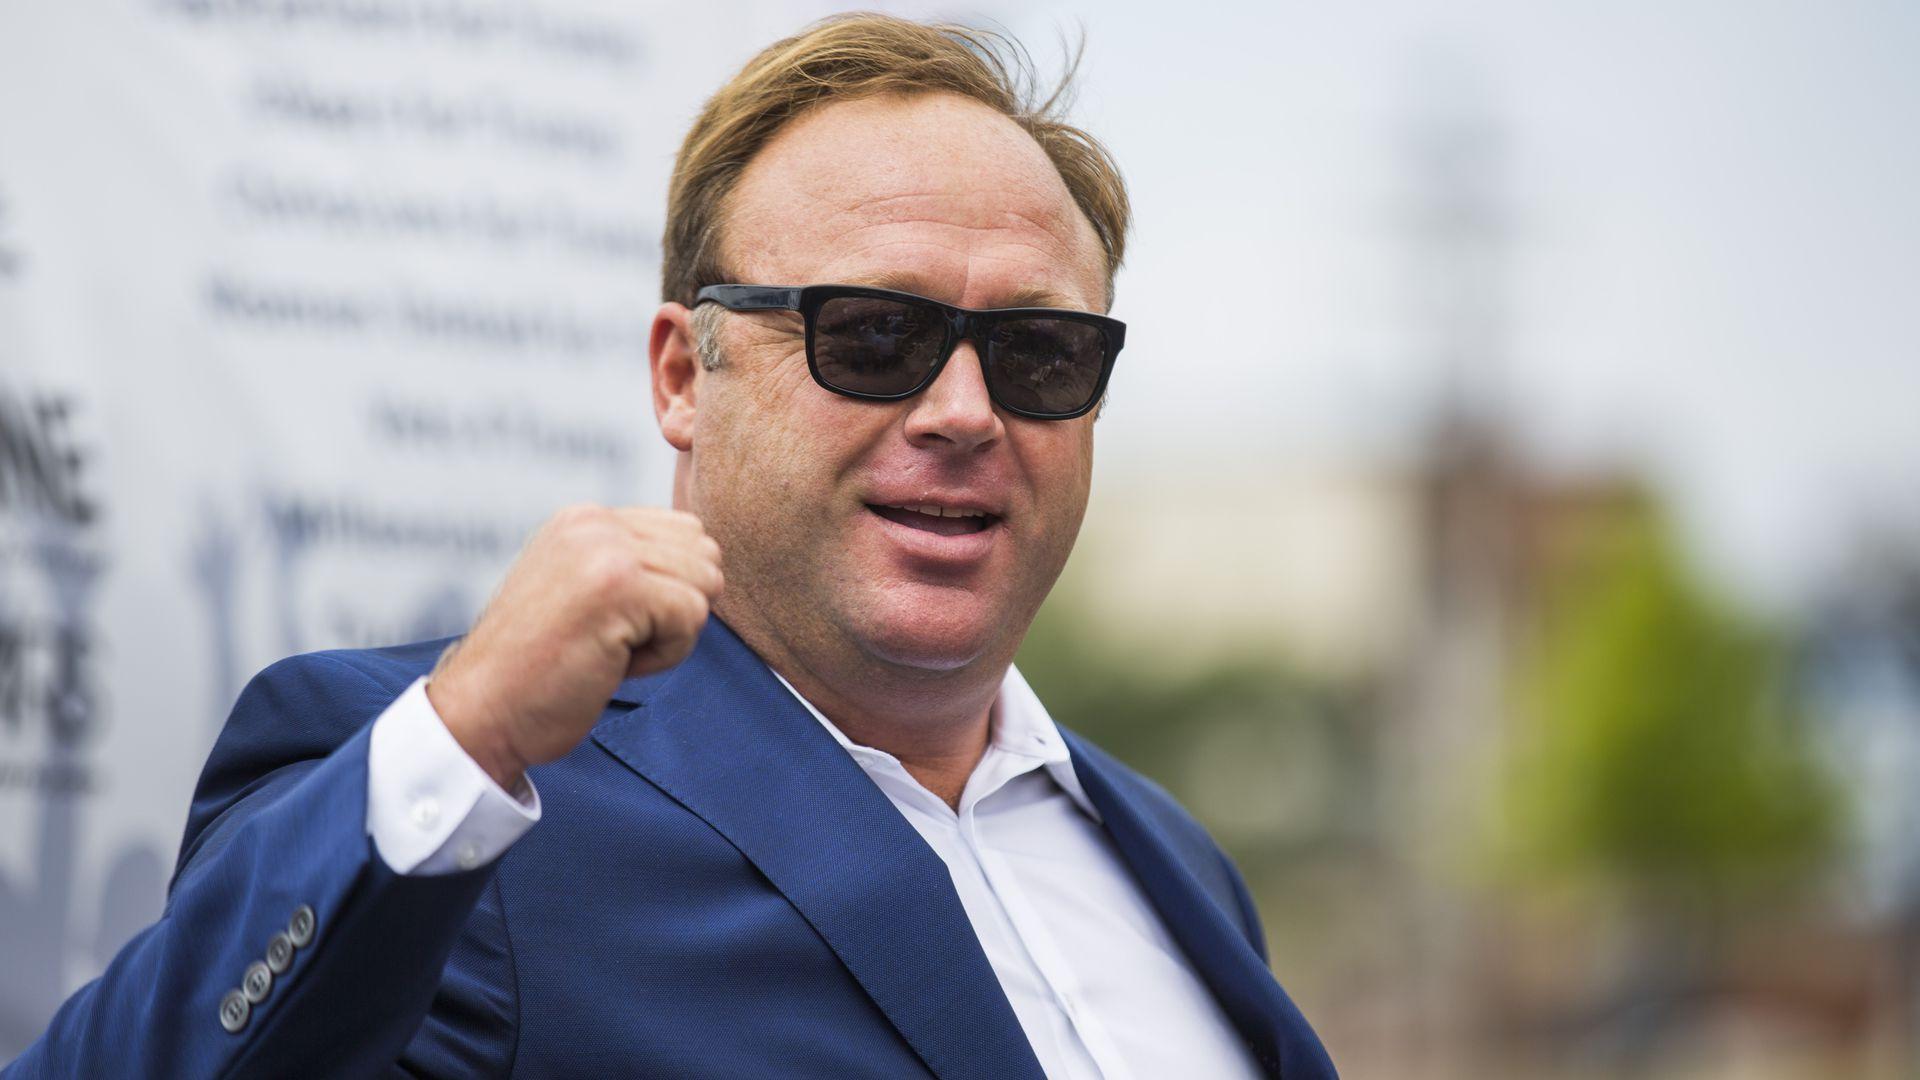 YouTube, Facebook, and Apple push to remove Alex Jones and Infowars